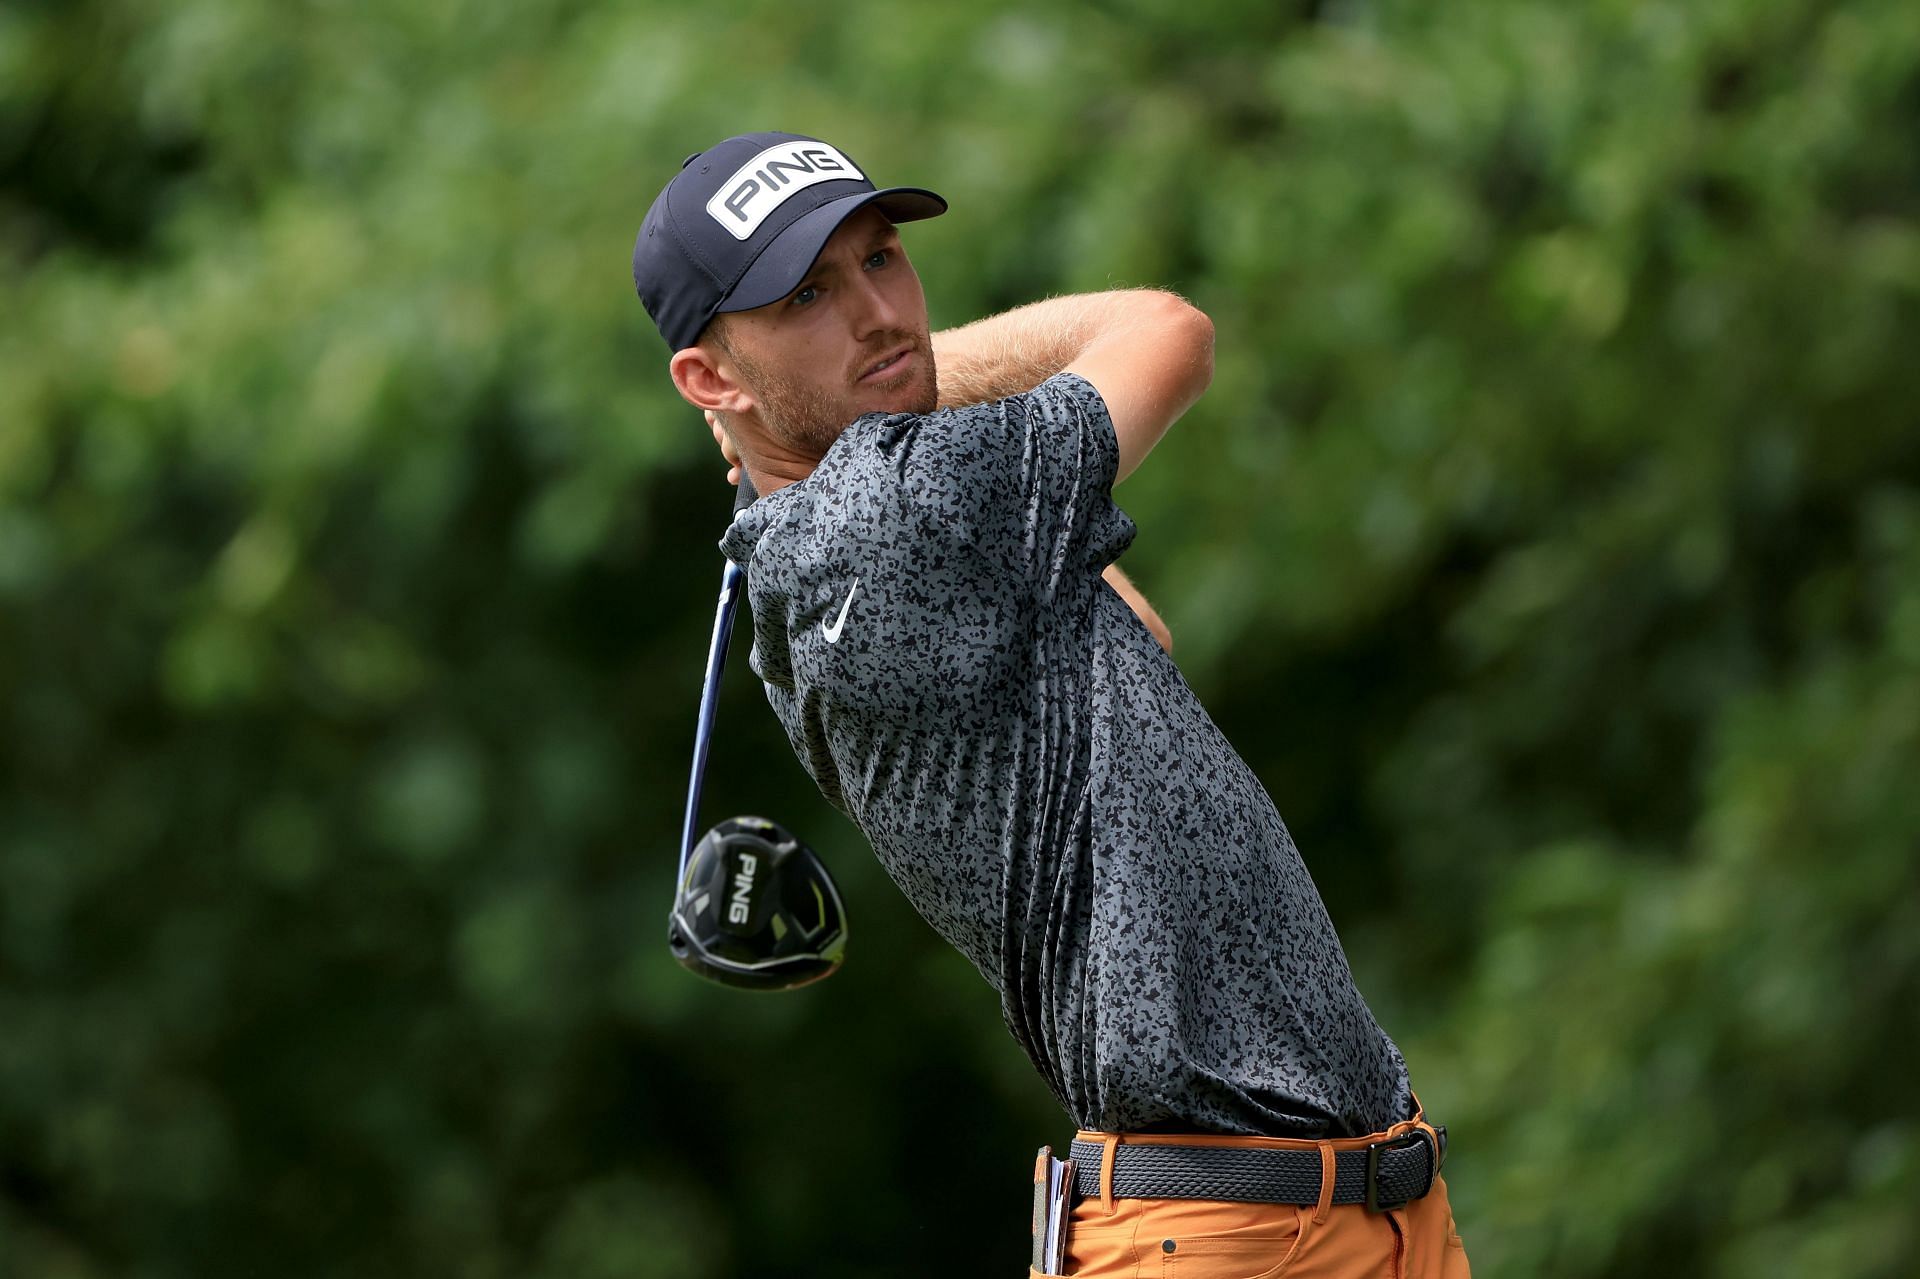 Michael Feagles at the BMW Charity Pro-Am (Image via Getty)